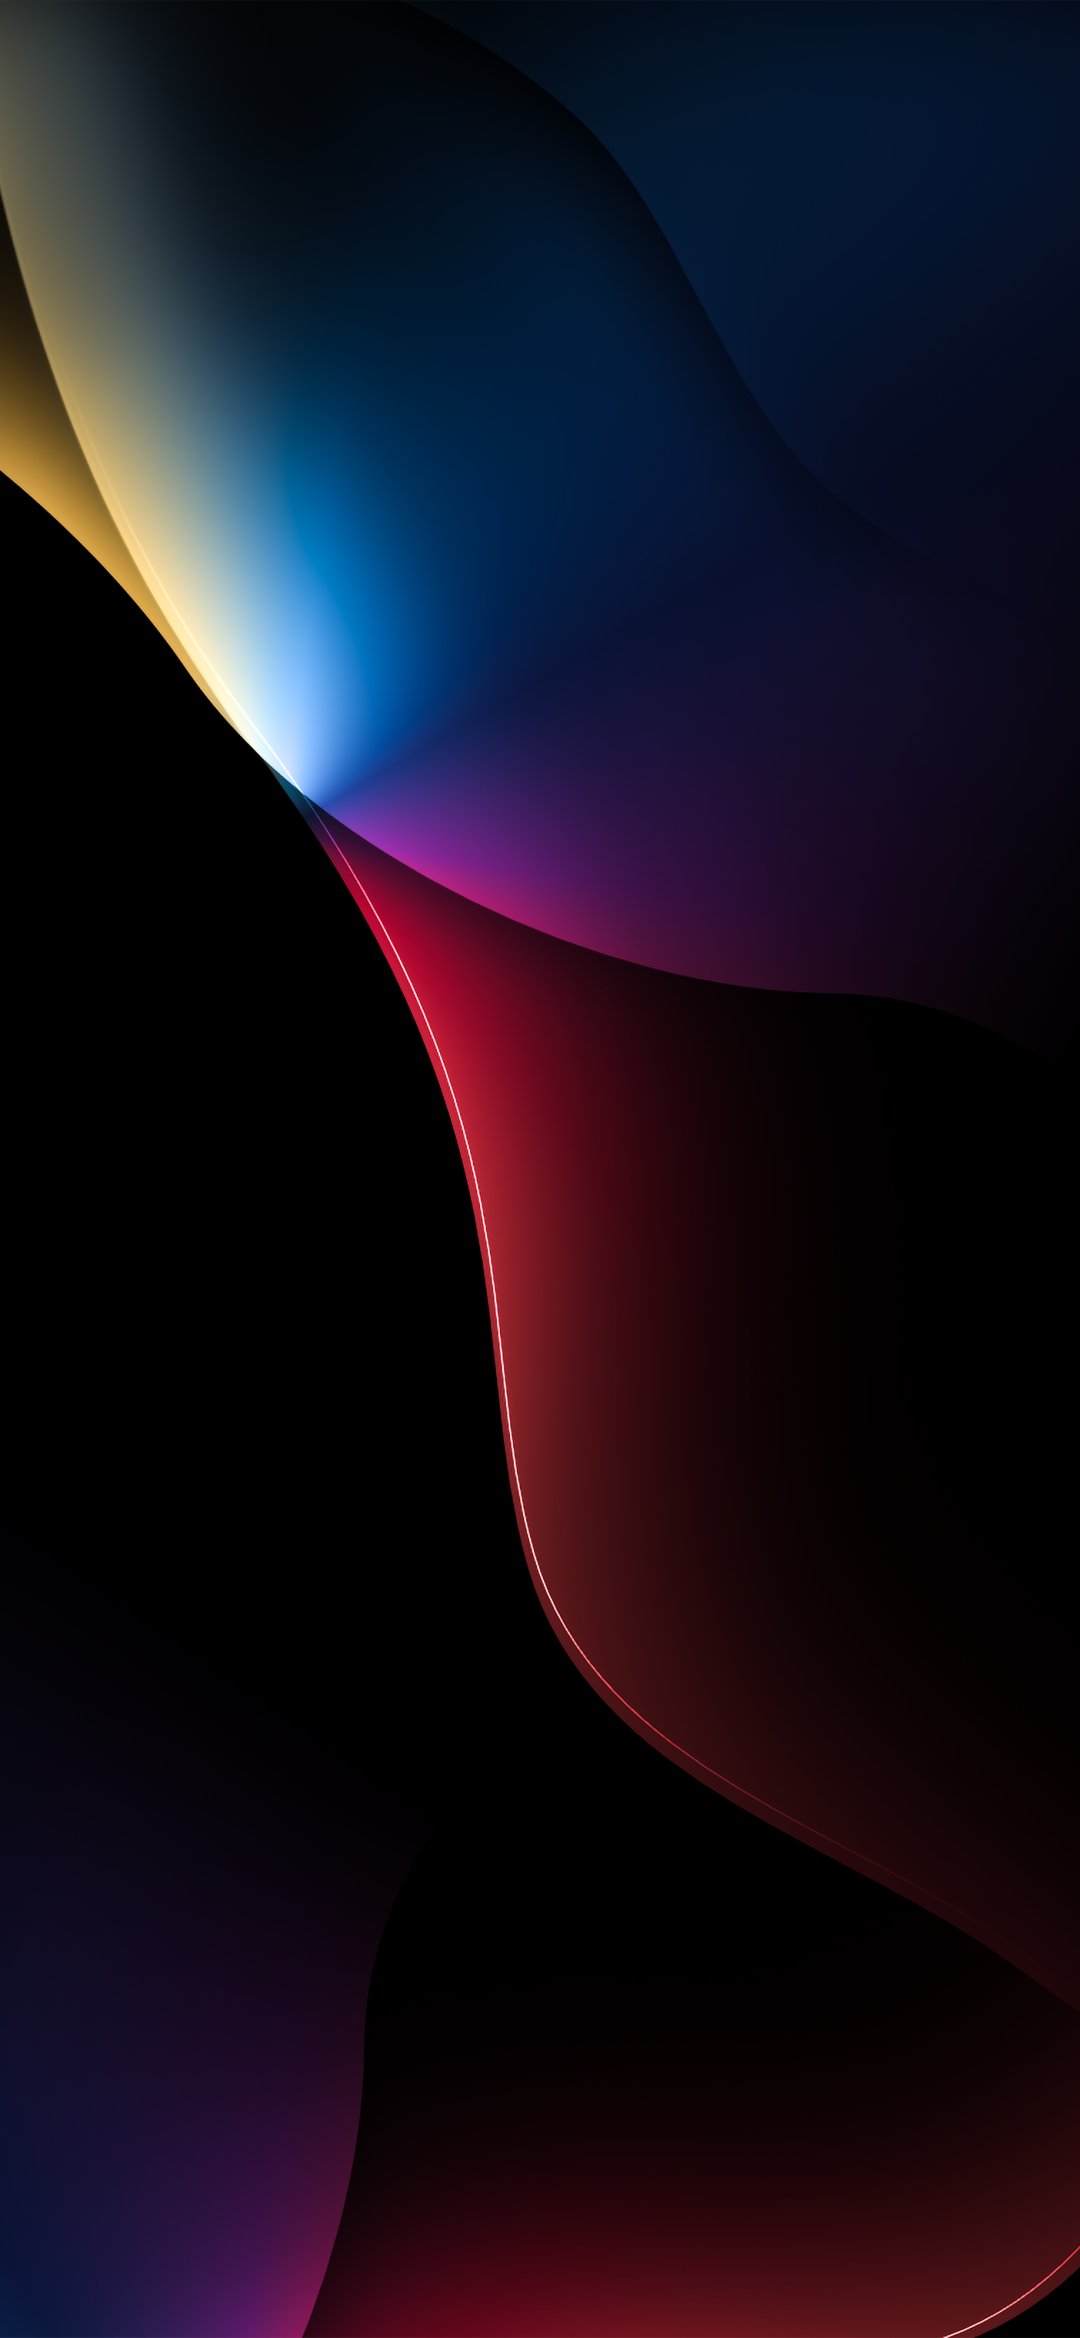 Dark Mode Iphone Wallpapers Wallpapers Of The Week The Colorful Sky